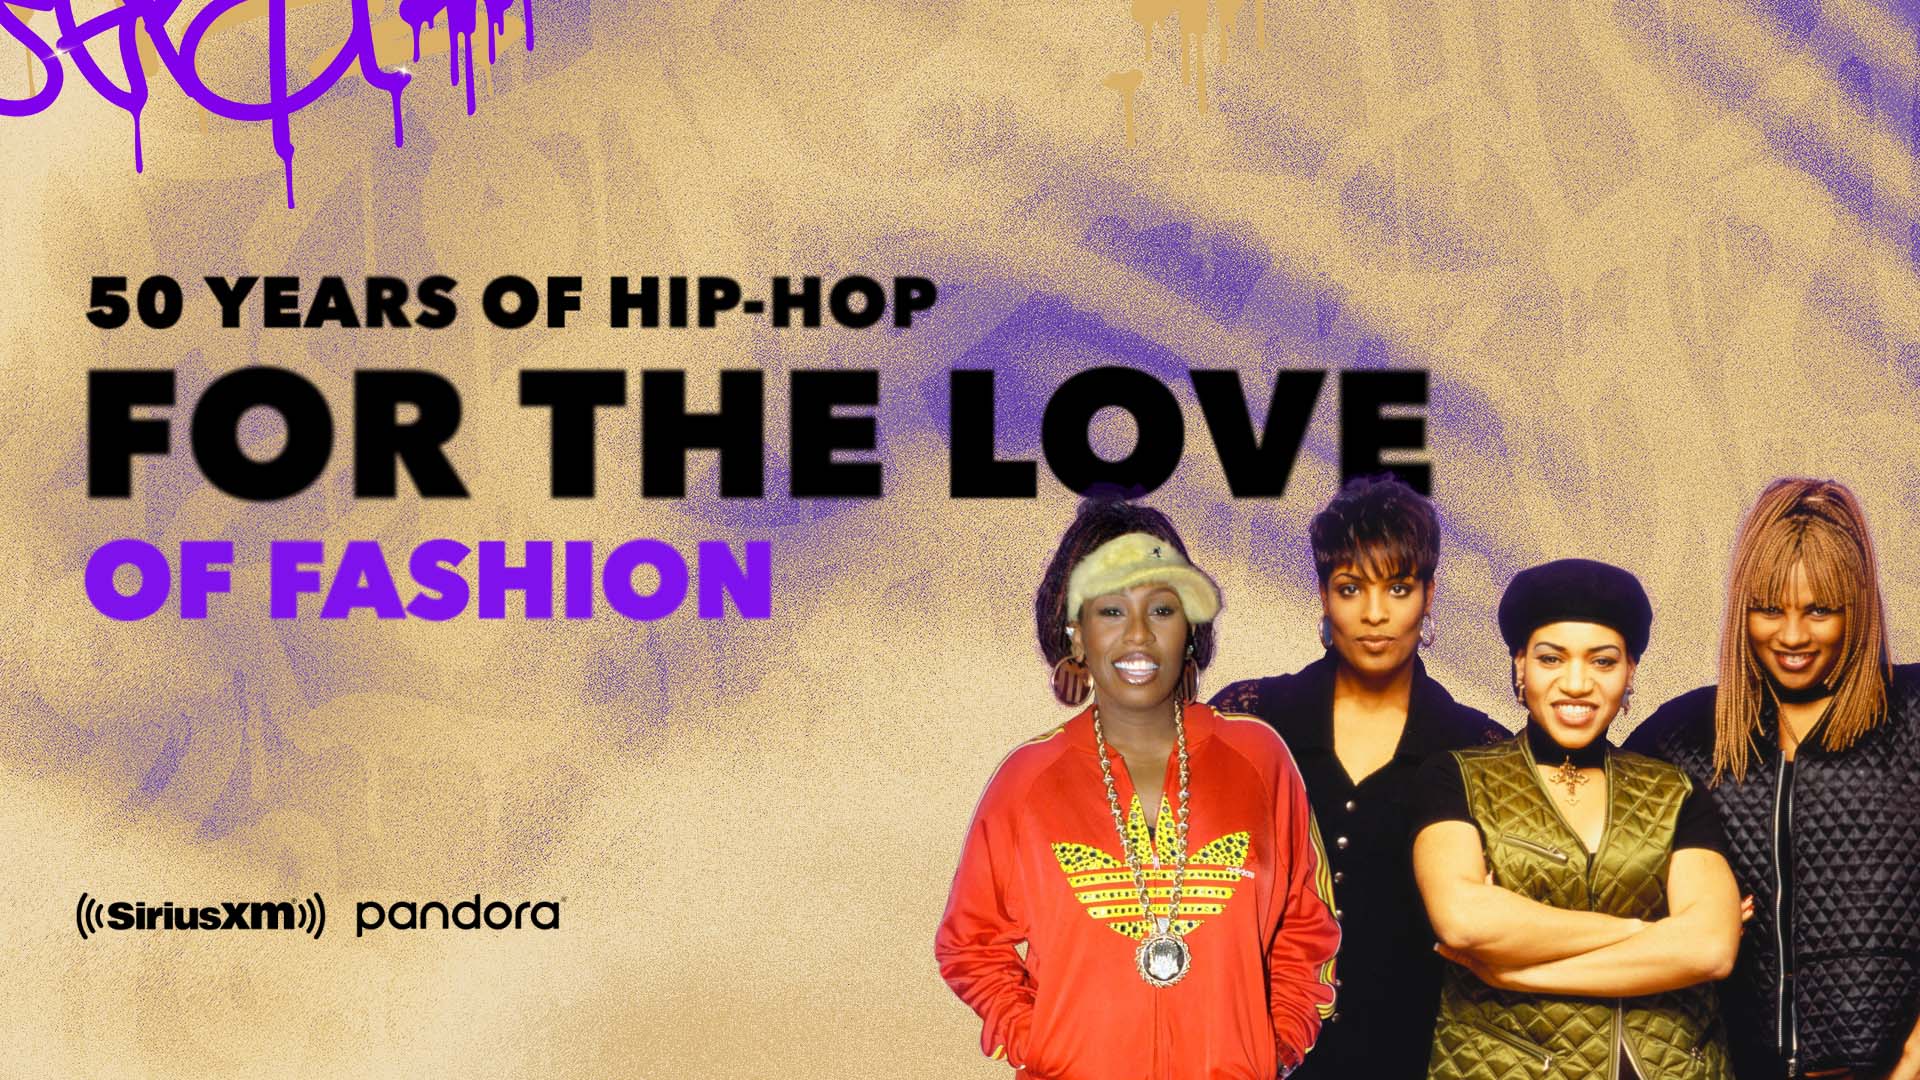 50 Years of Hip Hop - For the Love of Fashion